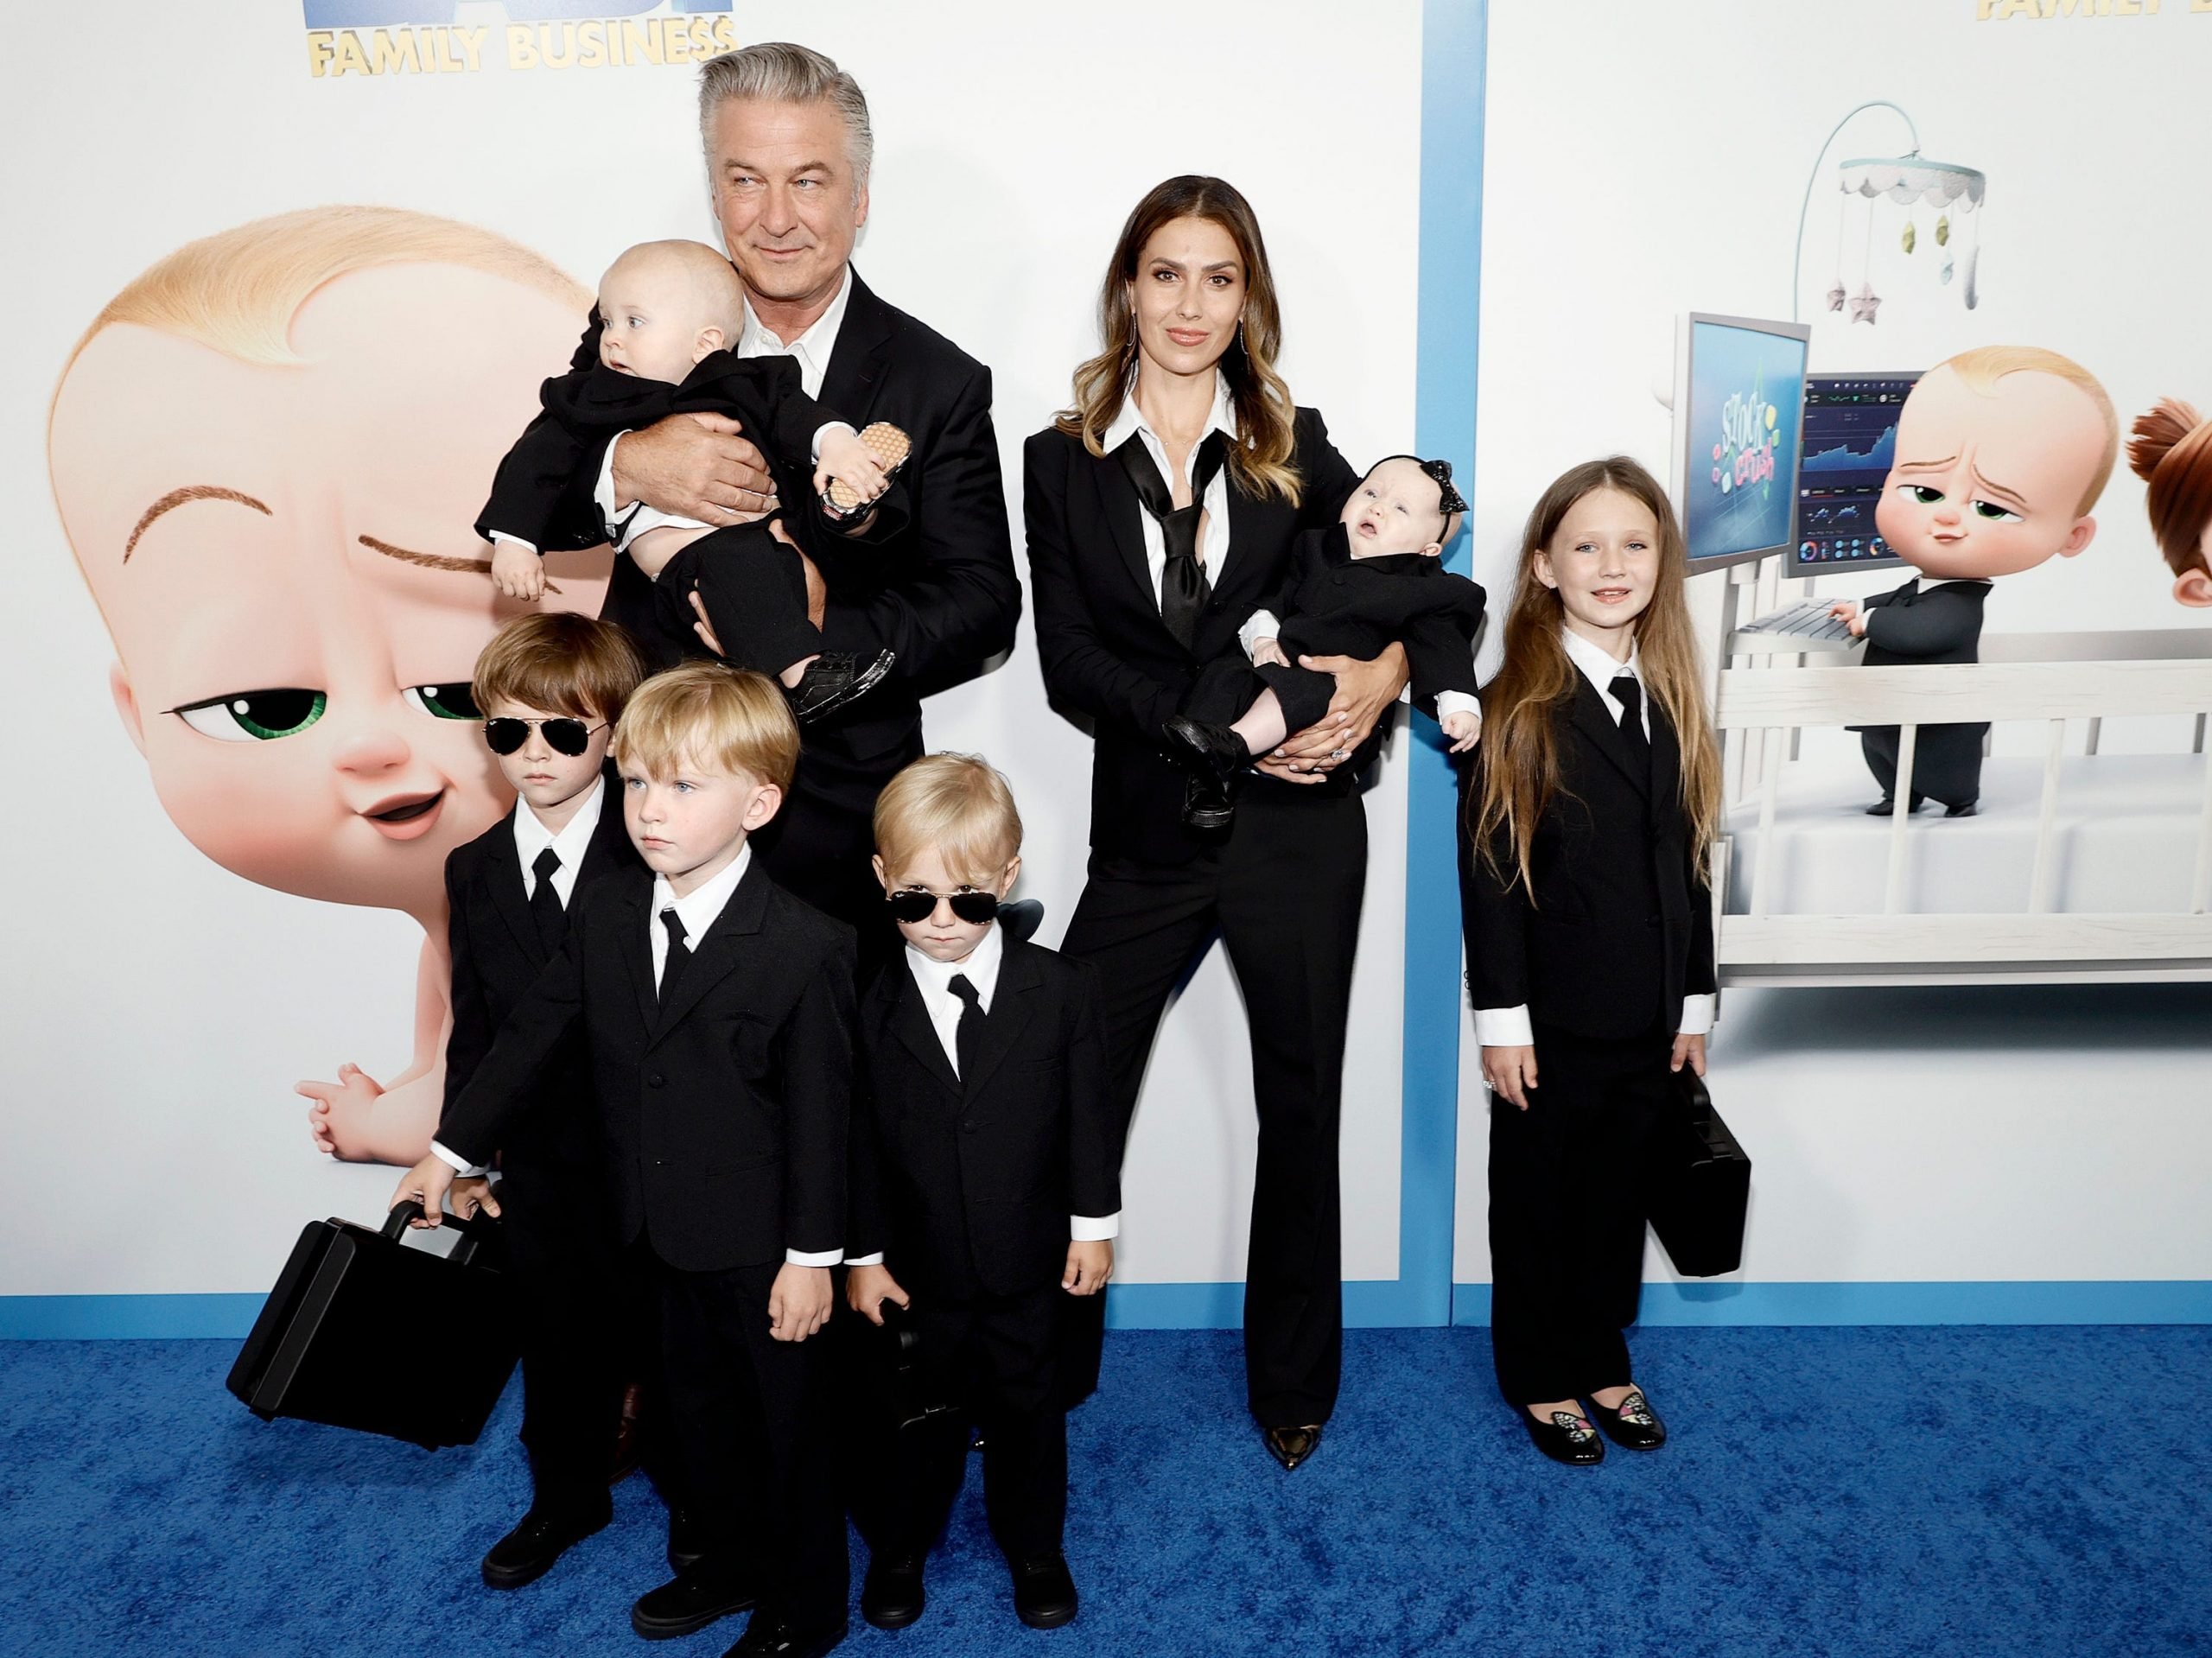 Alec Baldwin, Hilaria Baldwin, and their kids attend as DreamWorks Animation presents The Boss Baby: Family Business World Premiere.